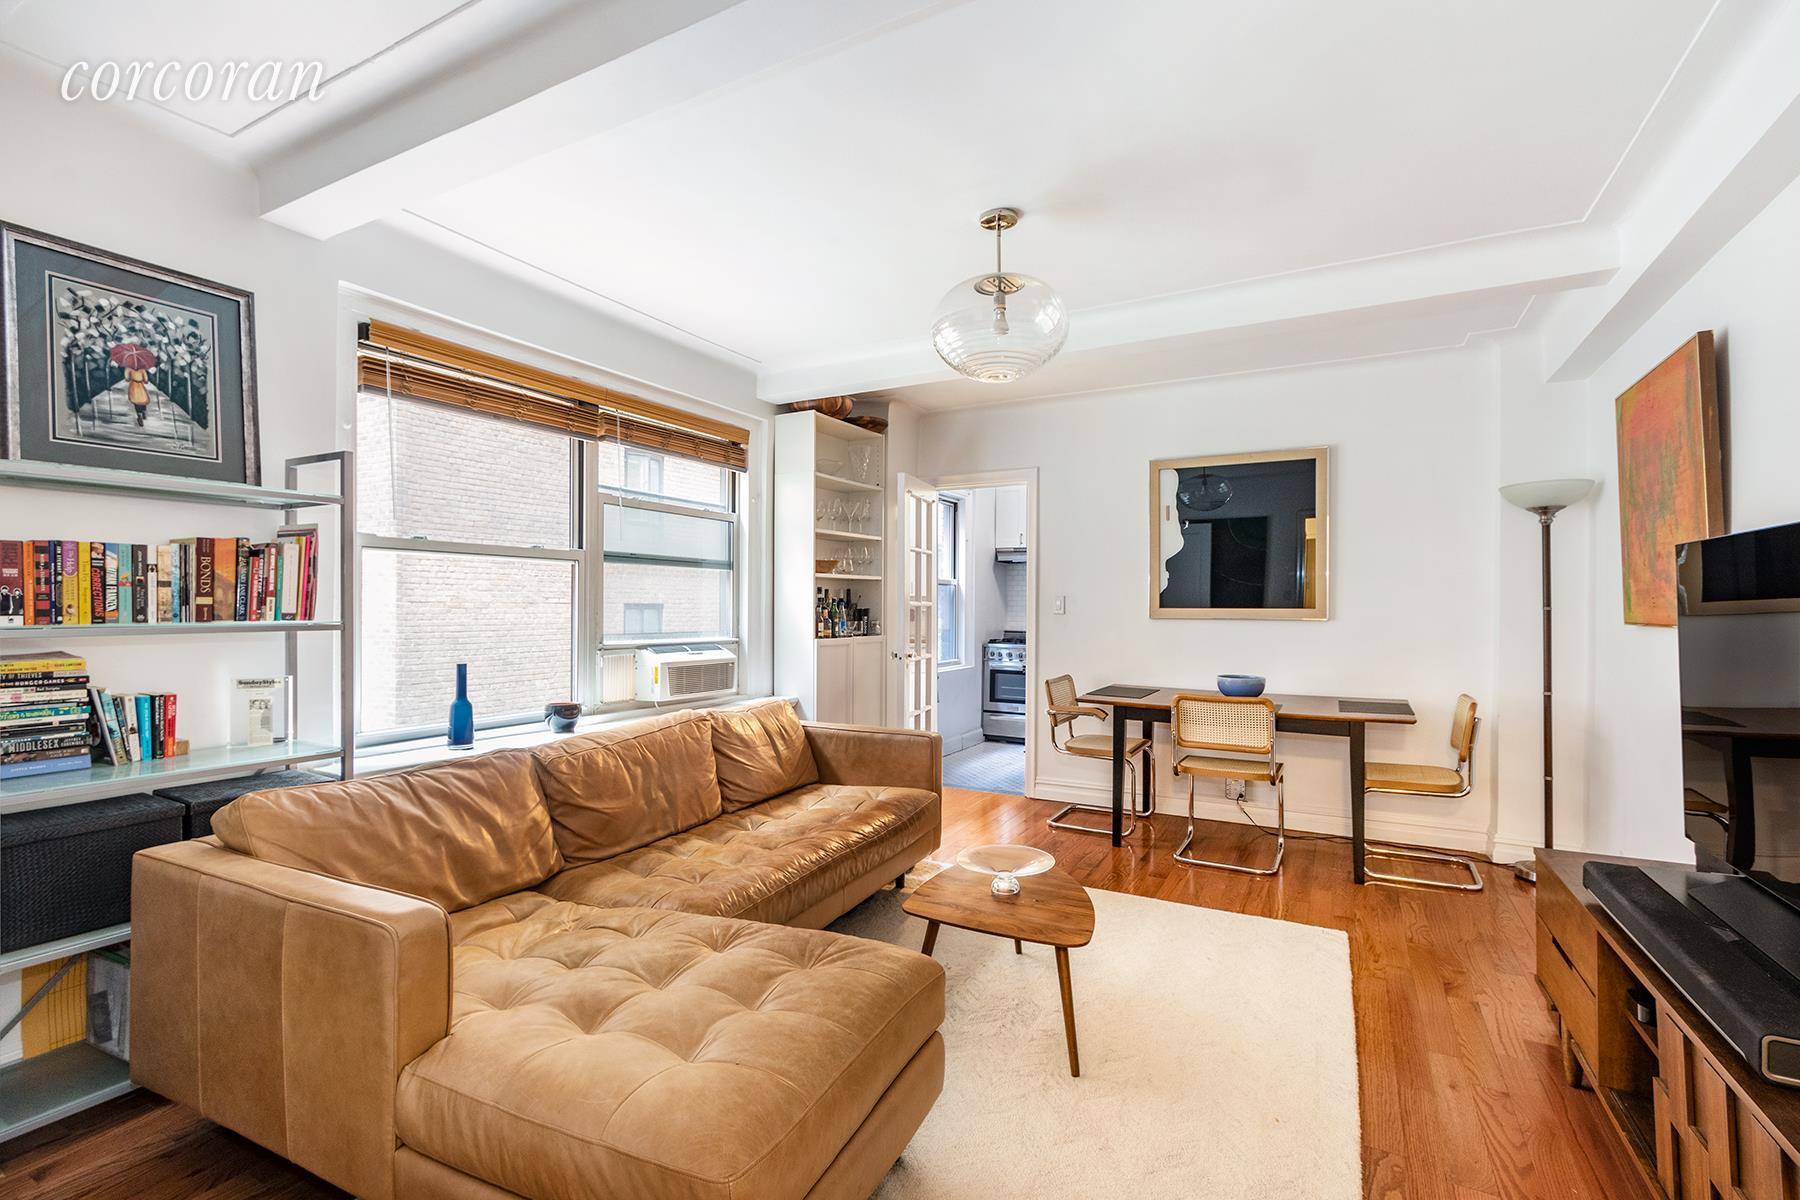 Beautifully renovated 2 bedroom, 2 bathroom apartment located on one of Brooklyn Heights' best blocks.